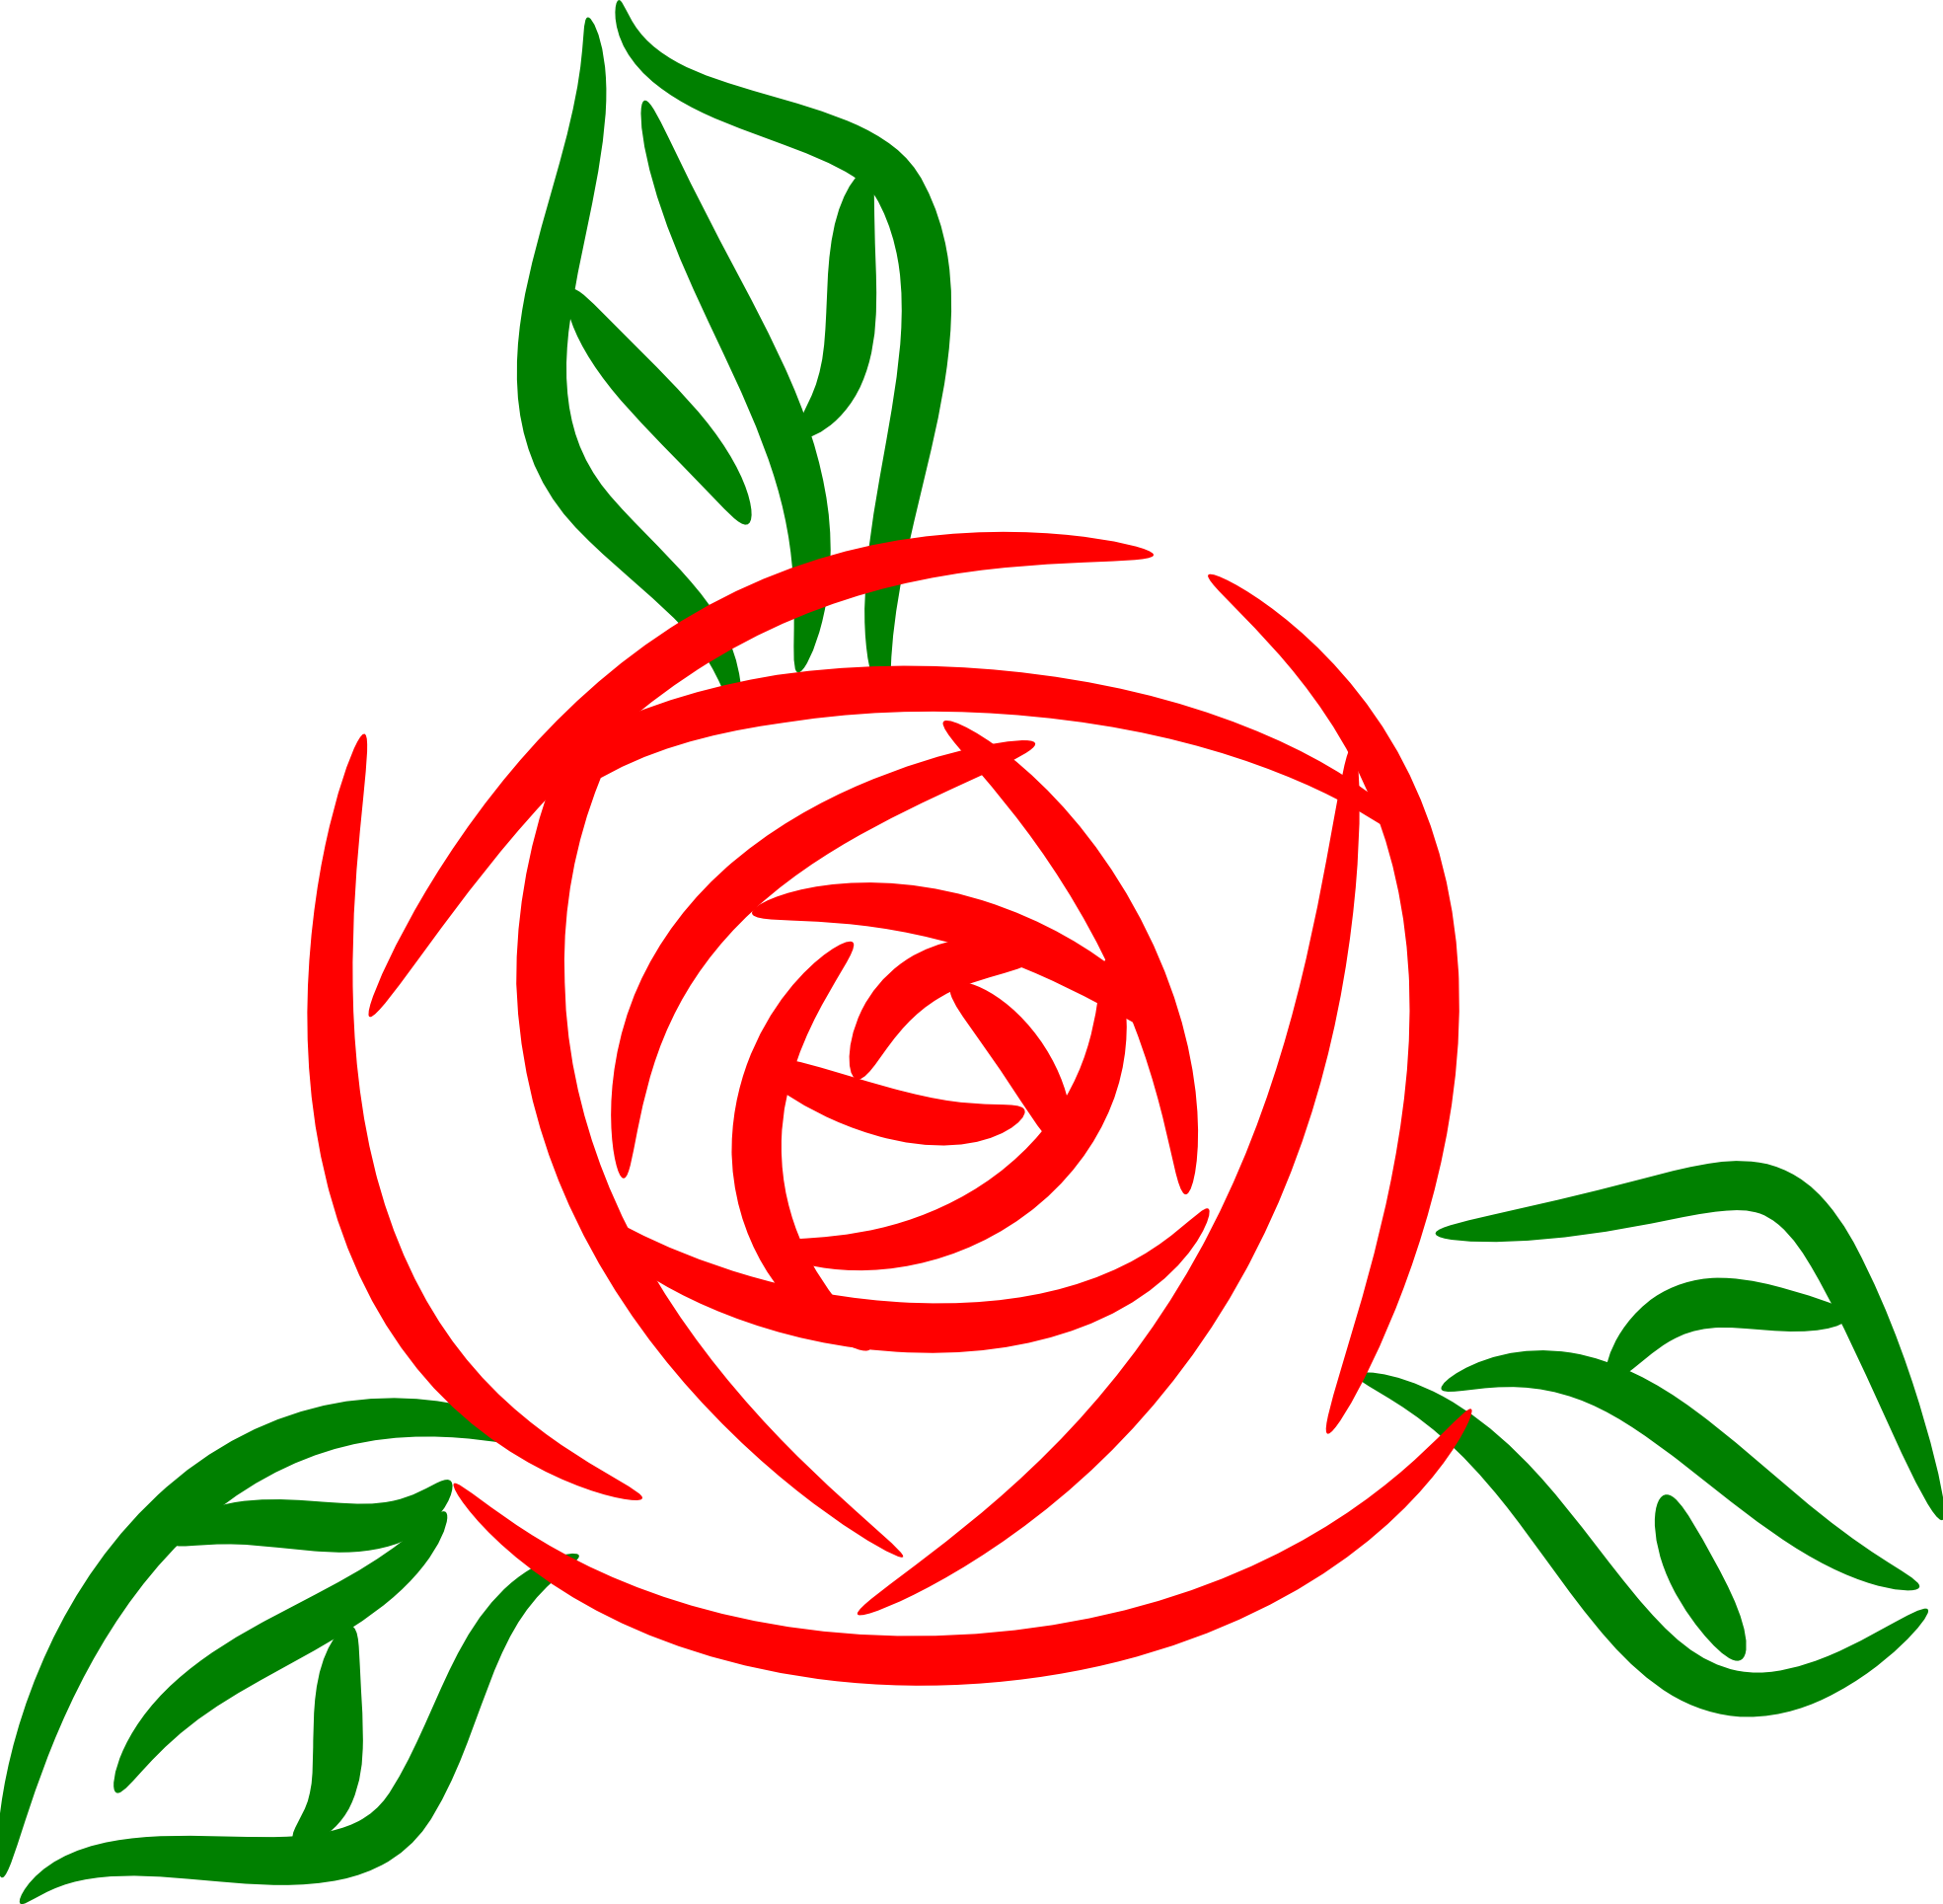 Free Clip Art Rose - Clipart library